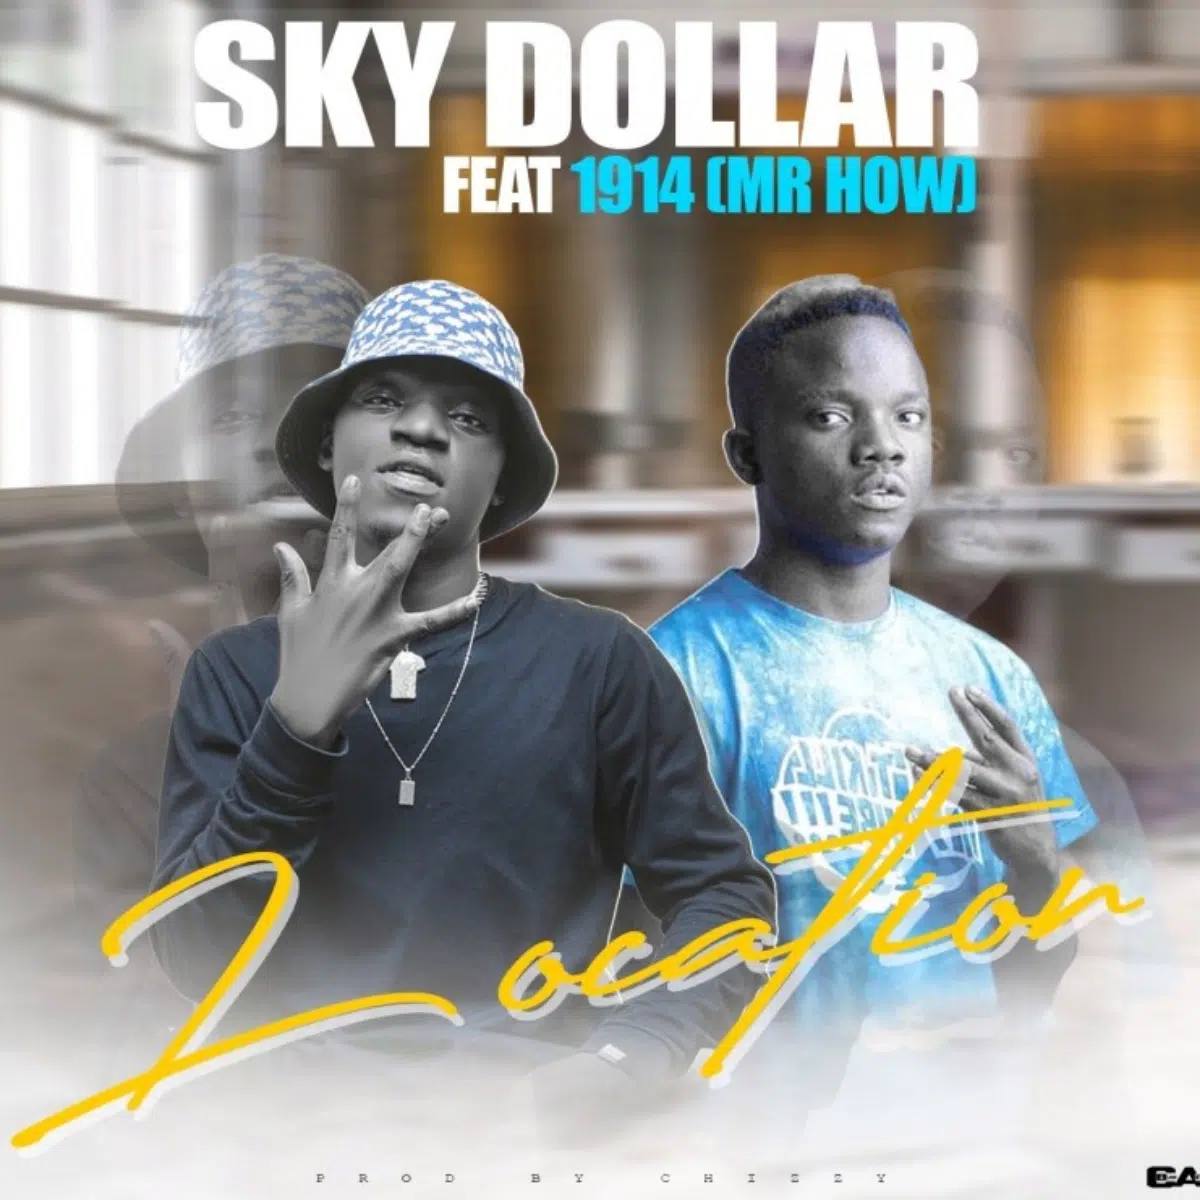 DOWNLOAD: Sky Dollar Ft 5 Mr How – “Location” Mp3